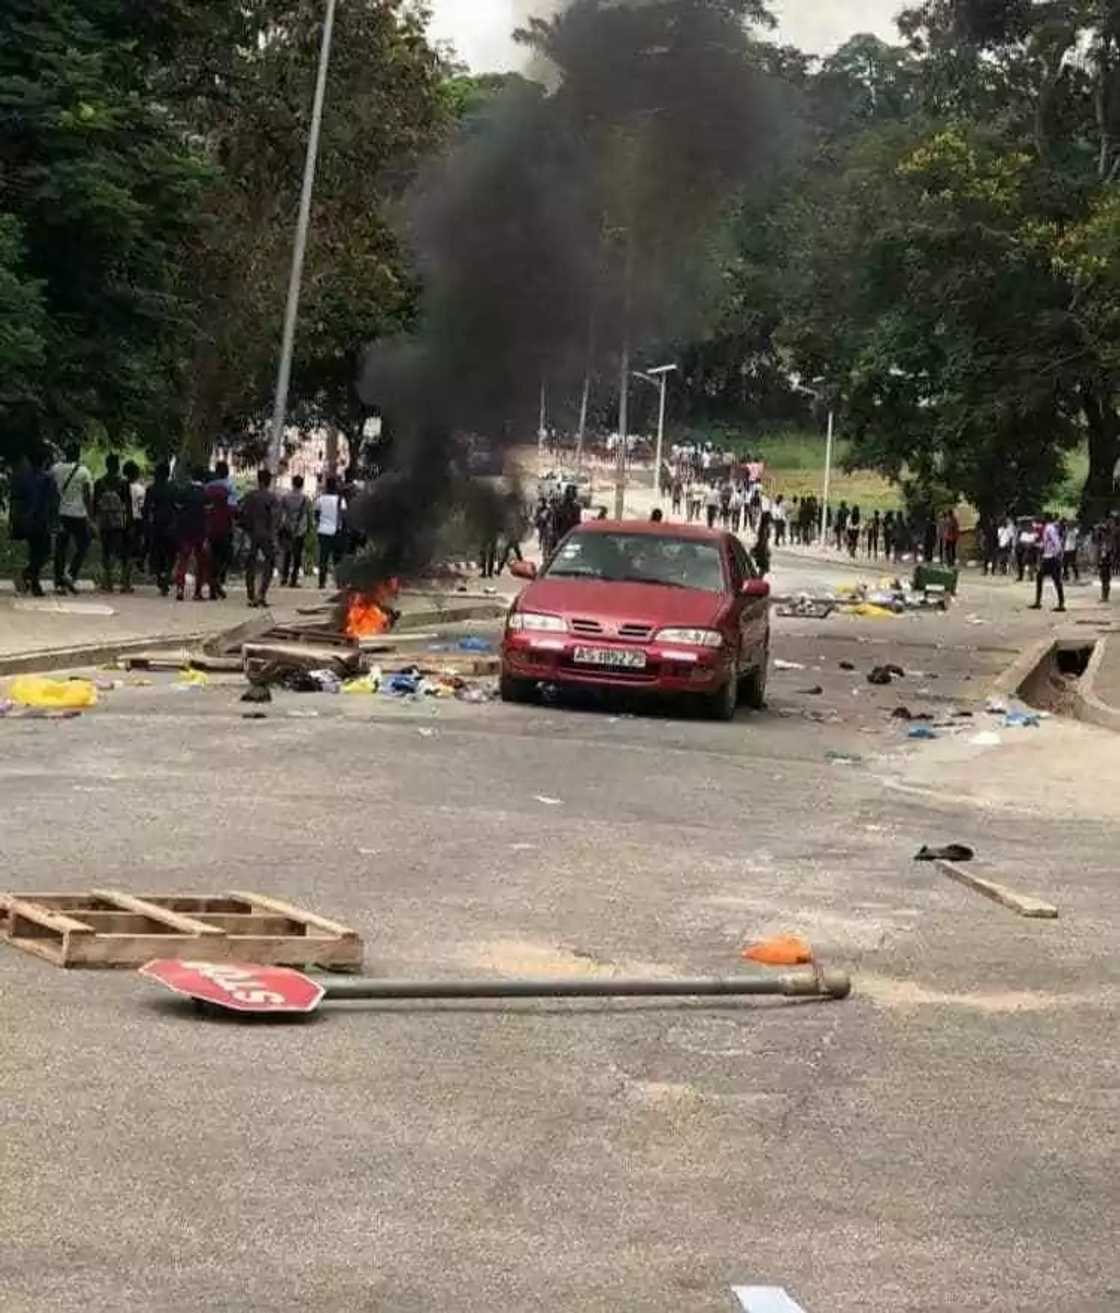 KNUST: Students brutalized, property vandalized in Conti-Kantanga clash